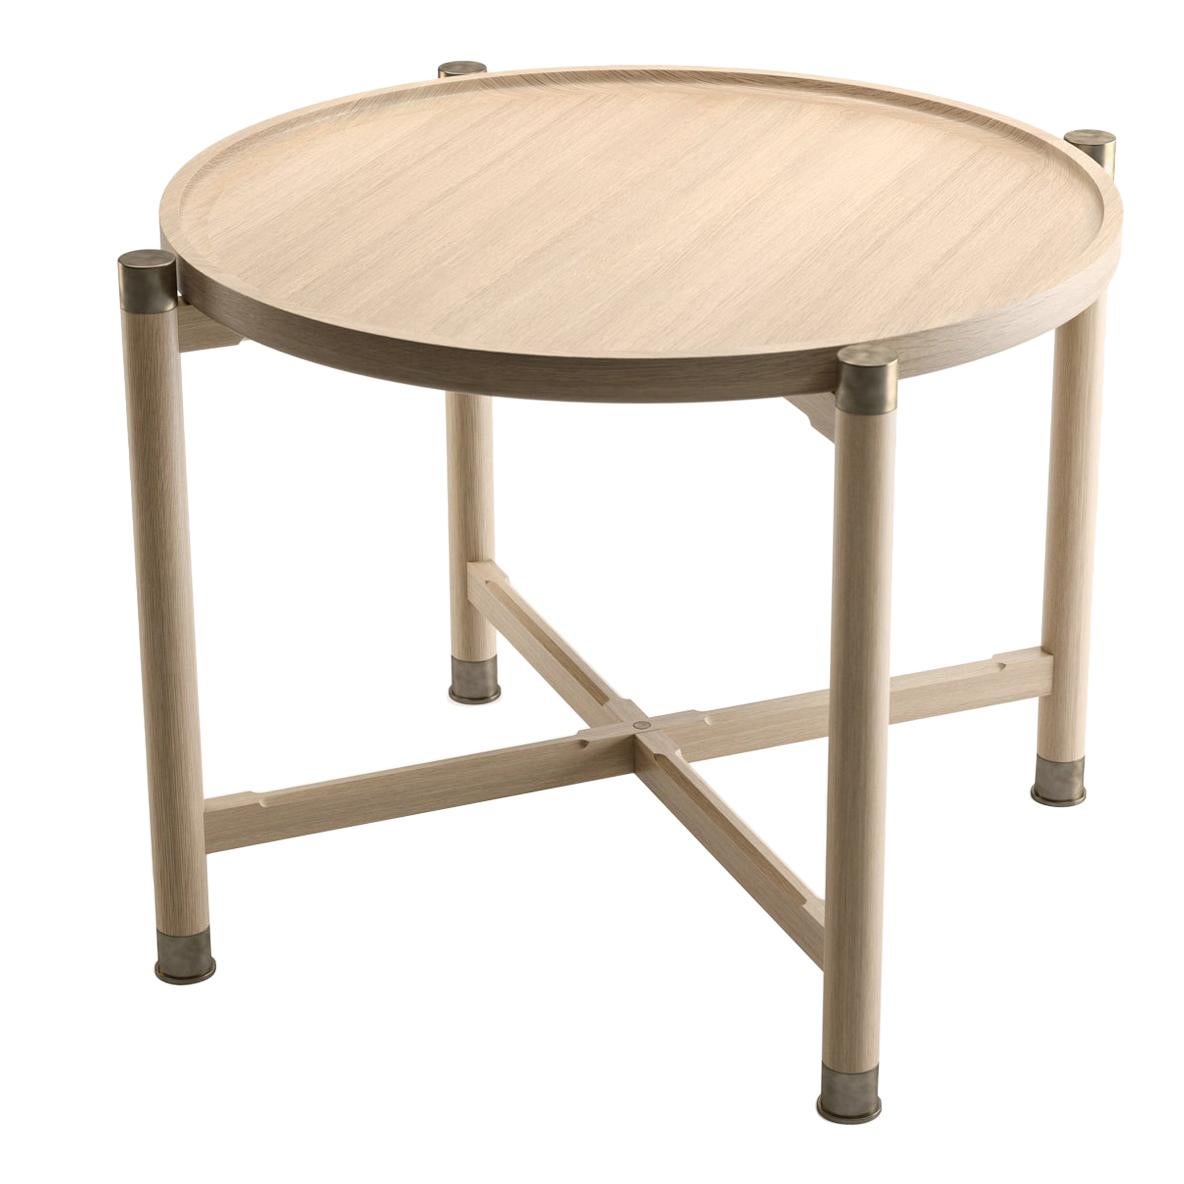 Otto Round Side Table in Bleached Oak with Antique Brass Fittings